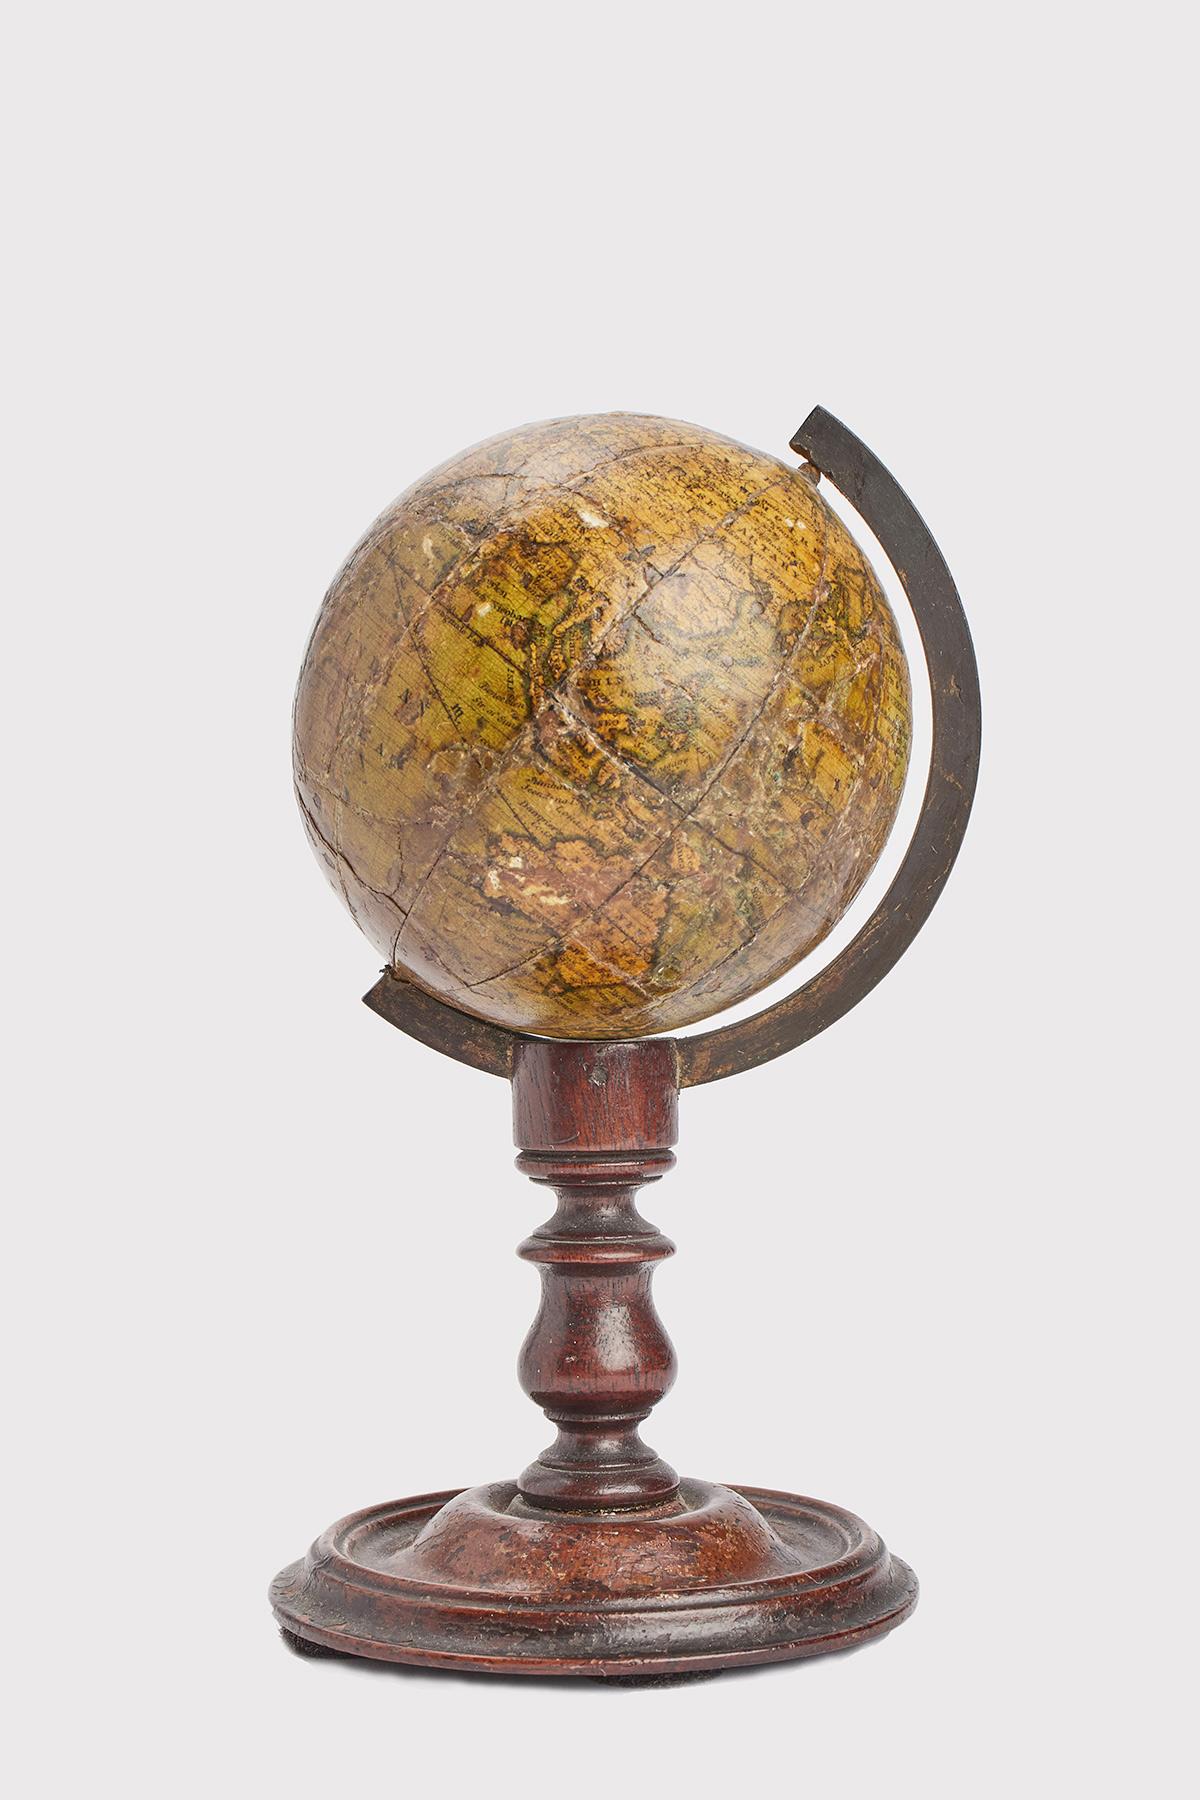 Over a round foot that rise with a central element with moved profile is connected the brass half meridian, which holds at the ends the metal axe of the little globe. The base is made out of dark brown Mahogany wood. The globe is made out of